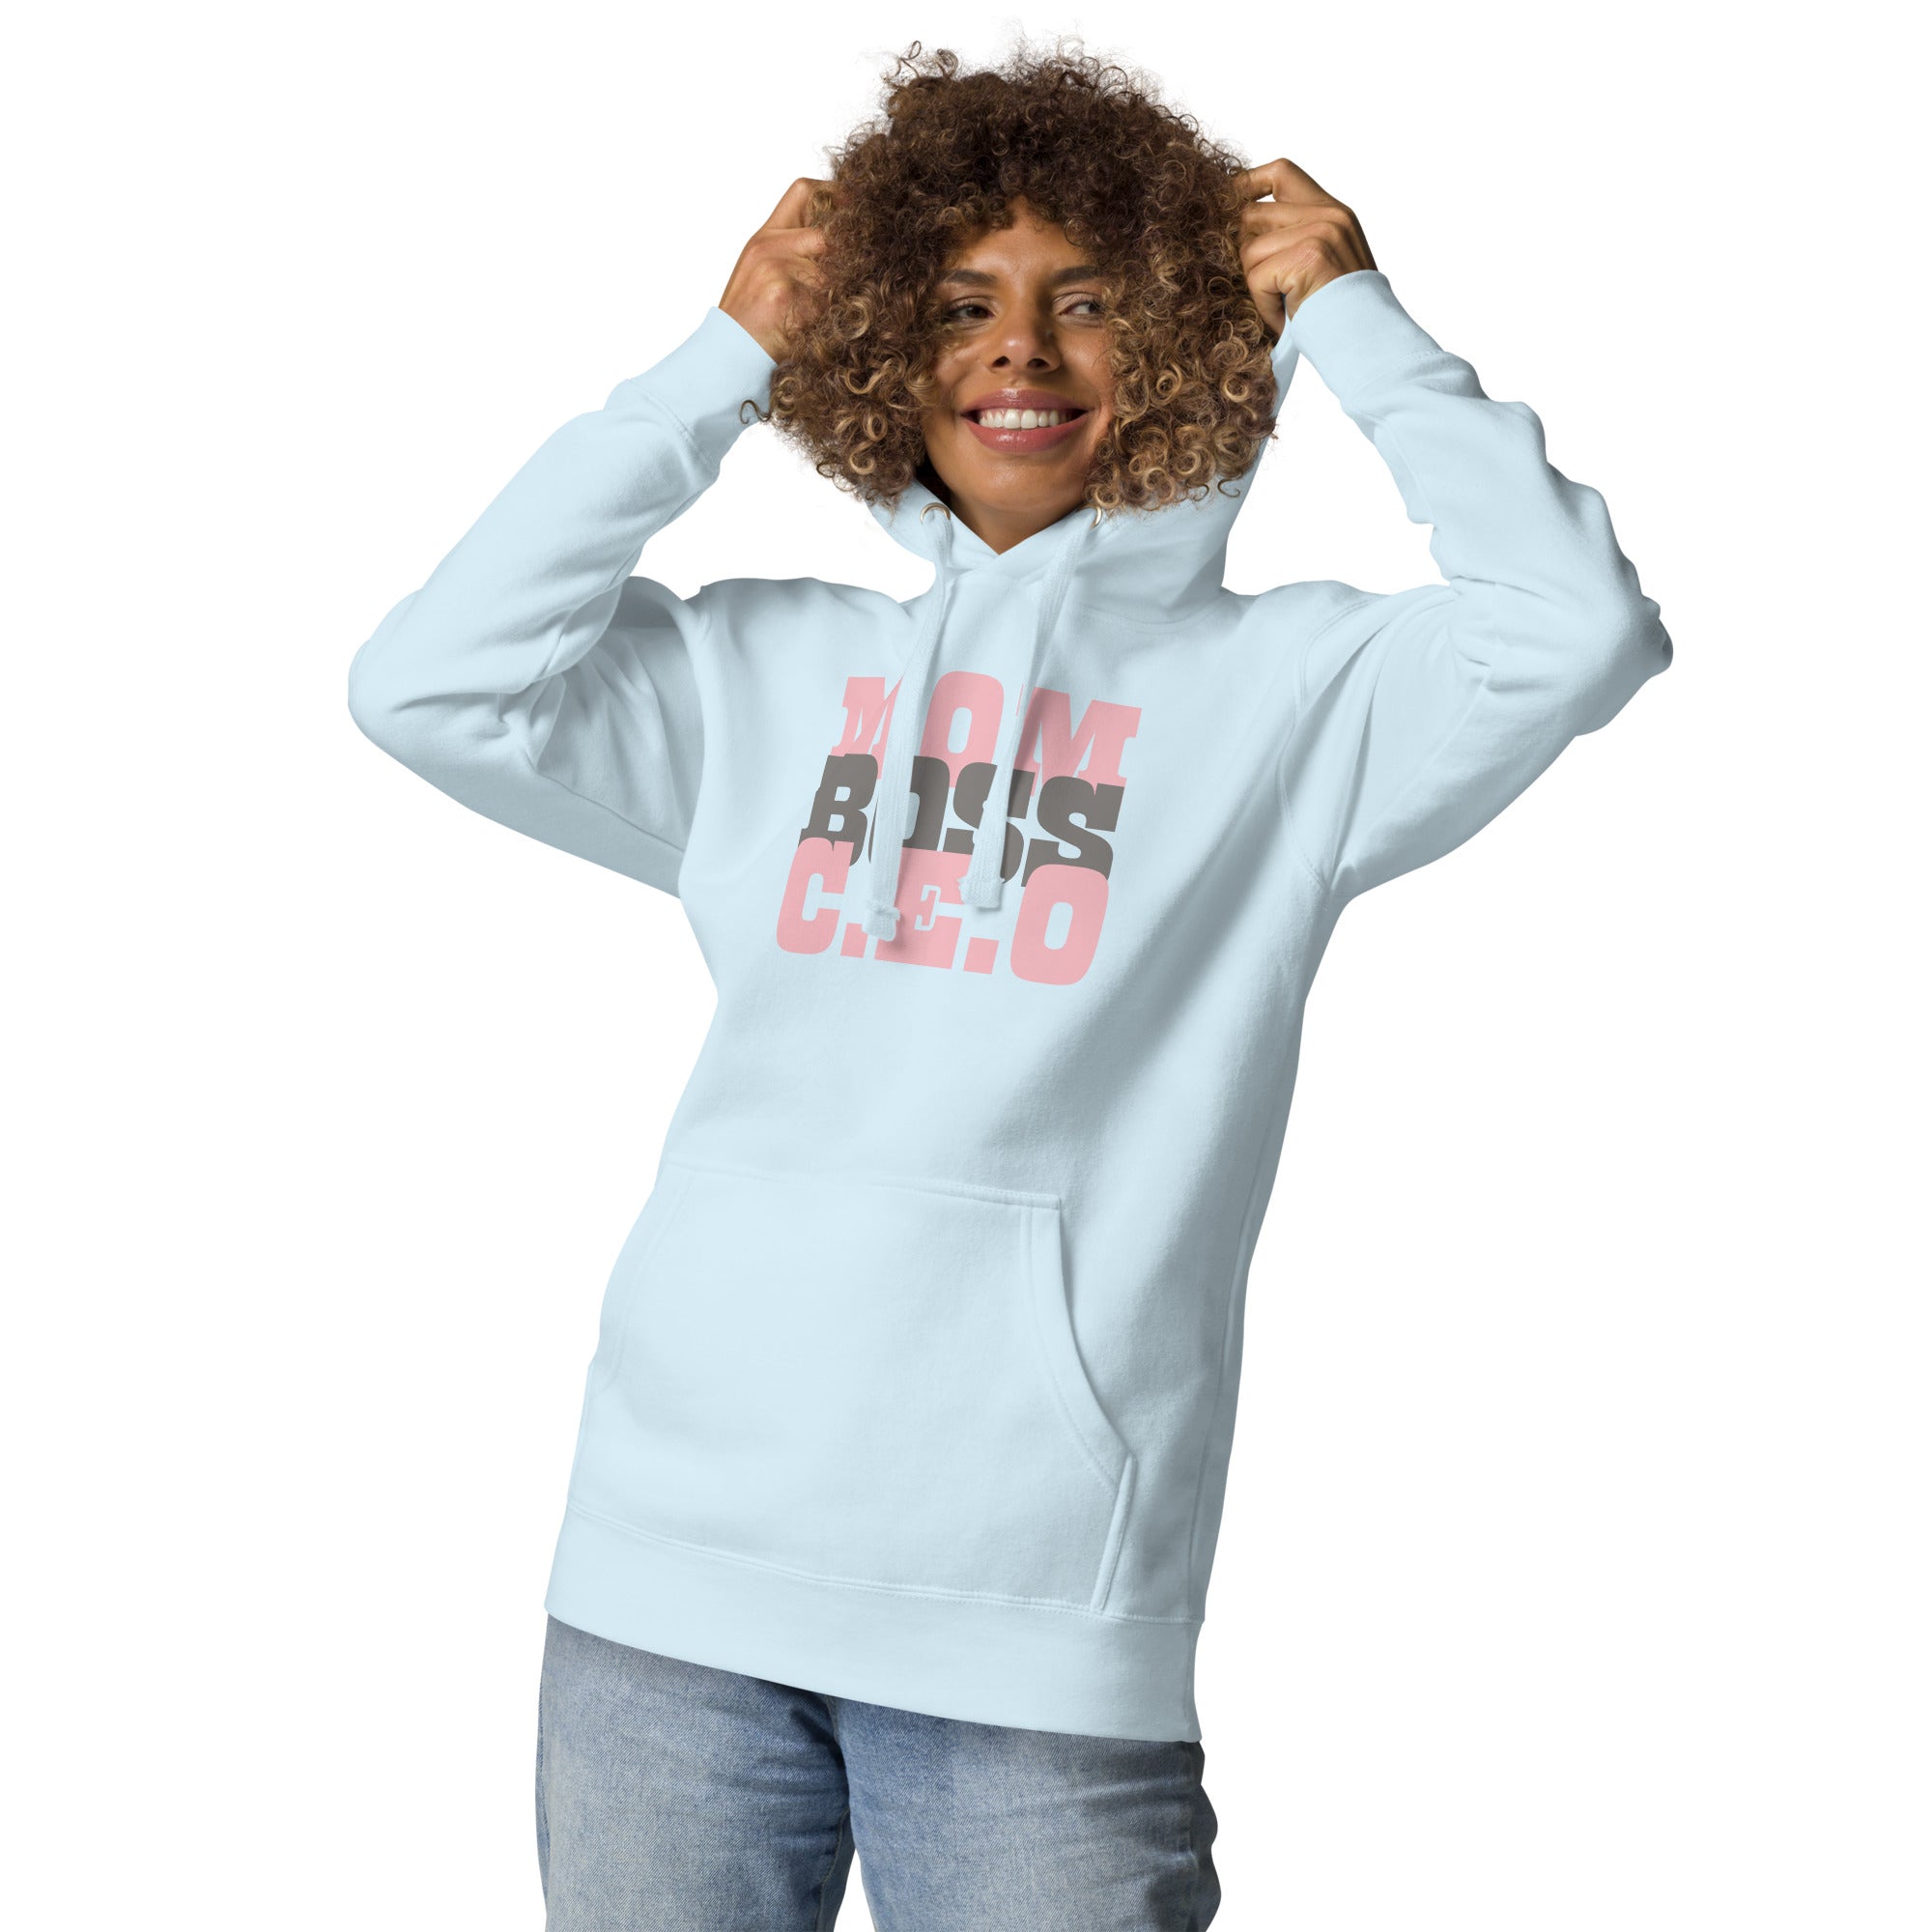 Shop Mom Boss C.E.O Graphic Hoodie | Mother's Day Gift Ideas, Hoodies, USA Boutique